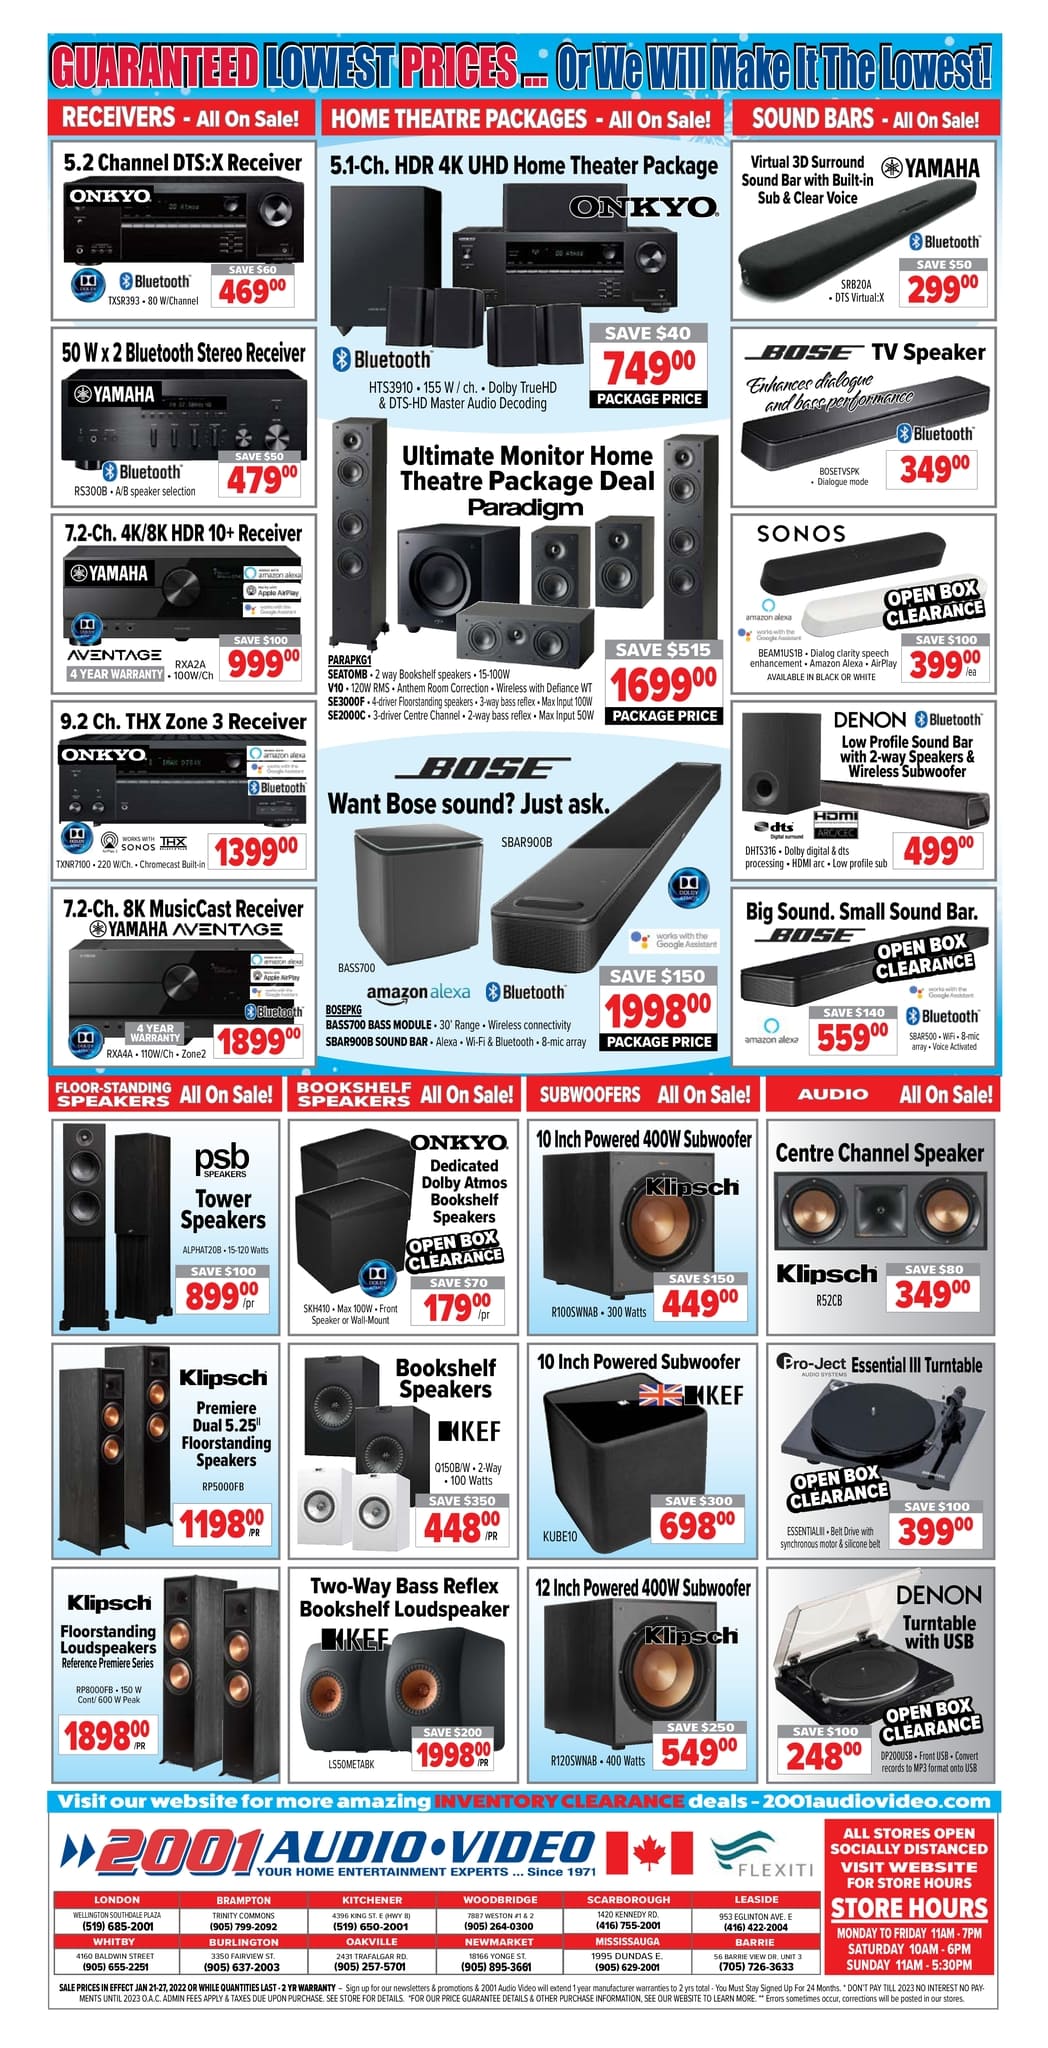 2001 Audio Video - Weekly Flyer Specials - Page 4